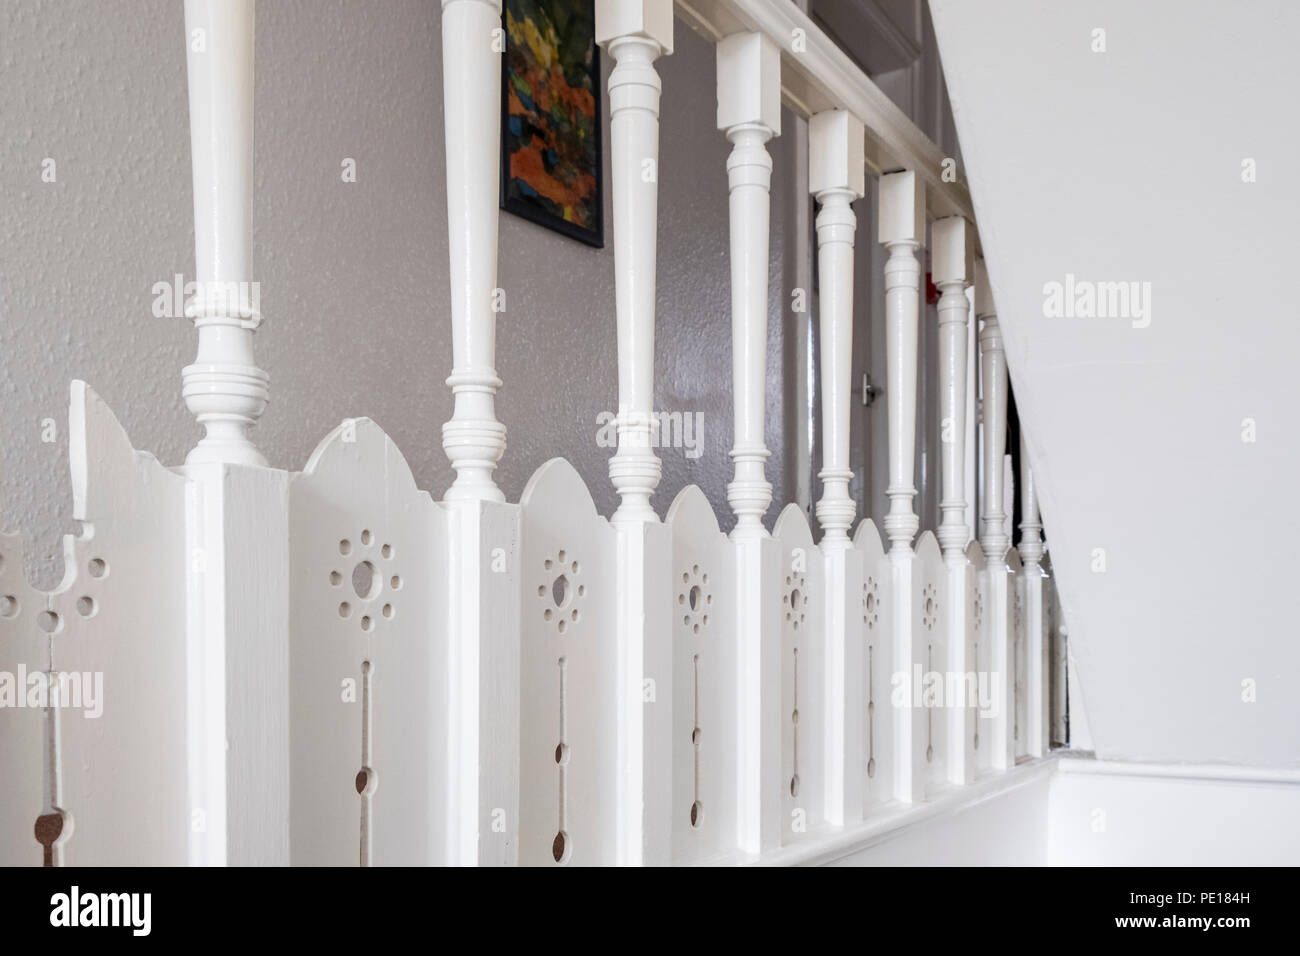 Detail of balusters supporting the handrail or bannister of the balustrade on the landing of a staircase Stock Photo